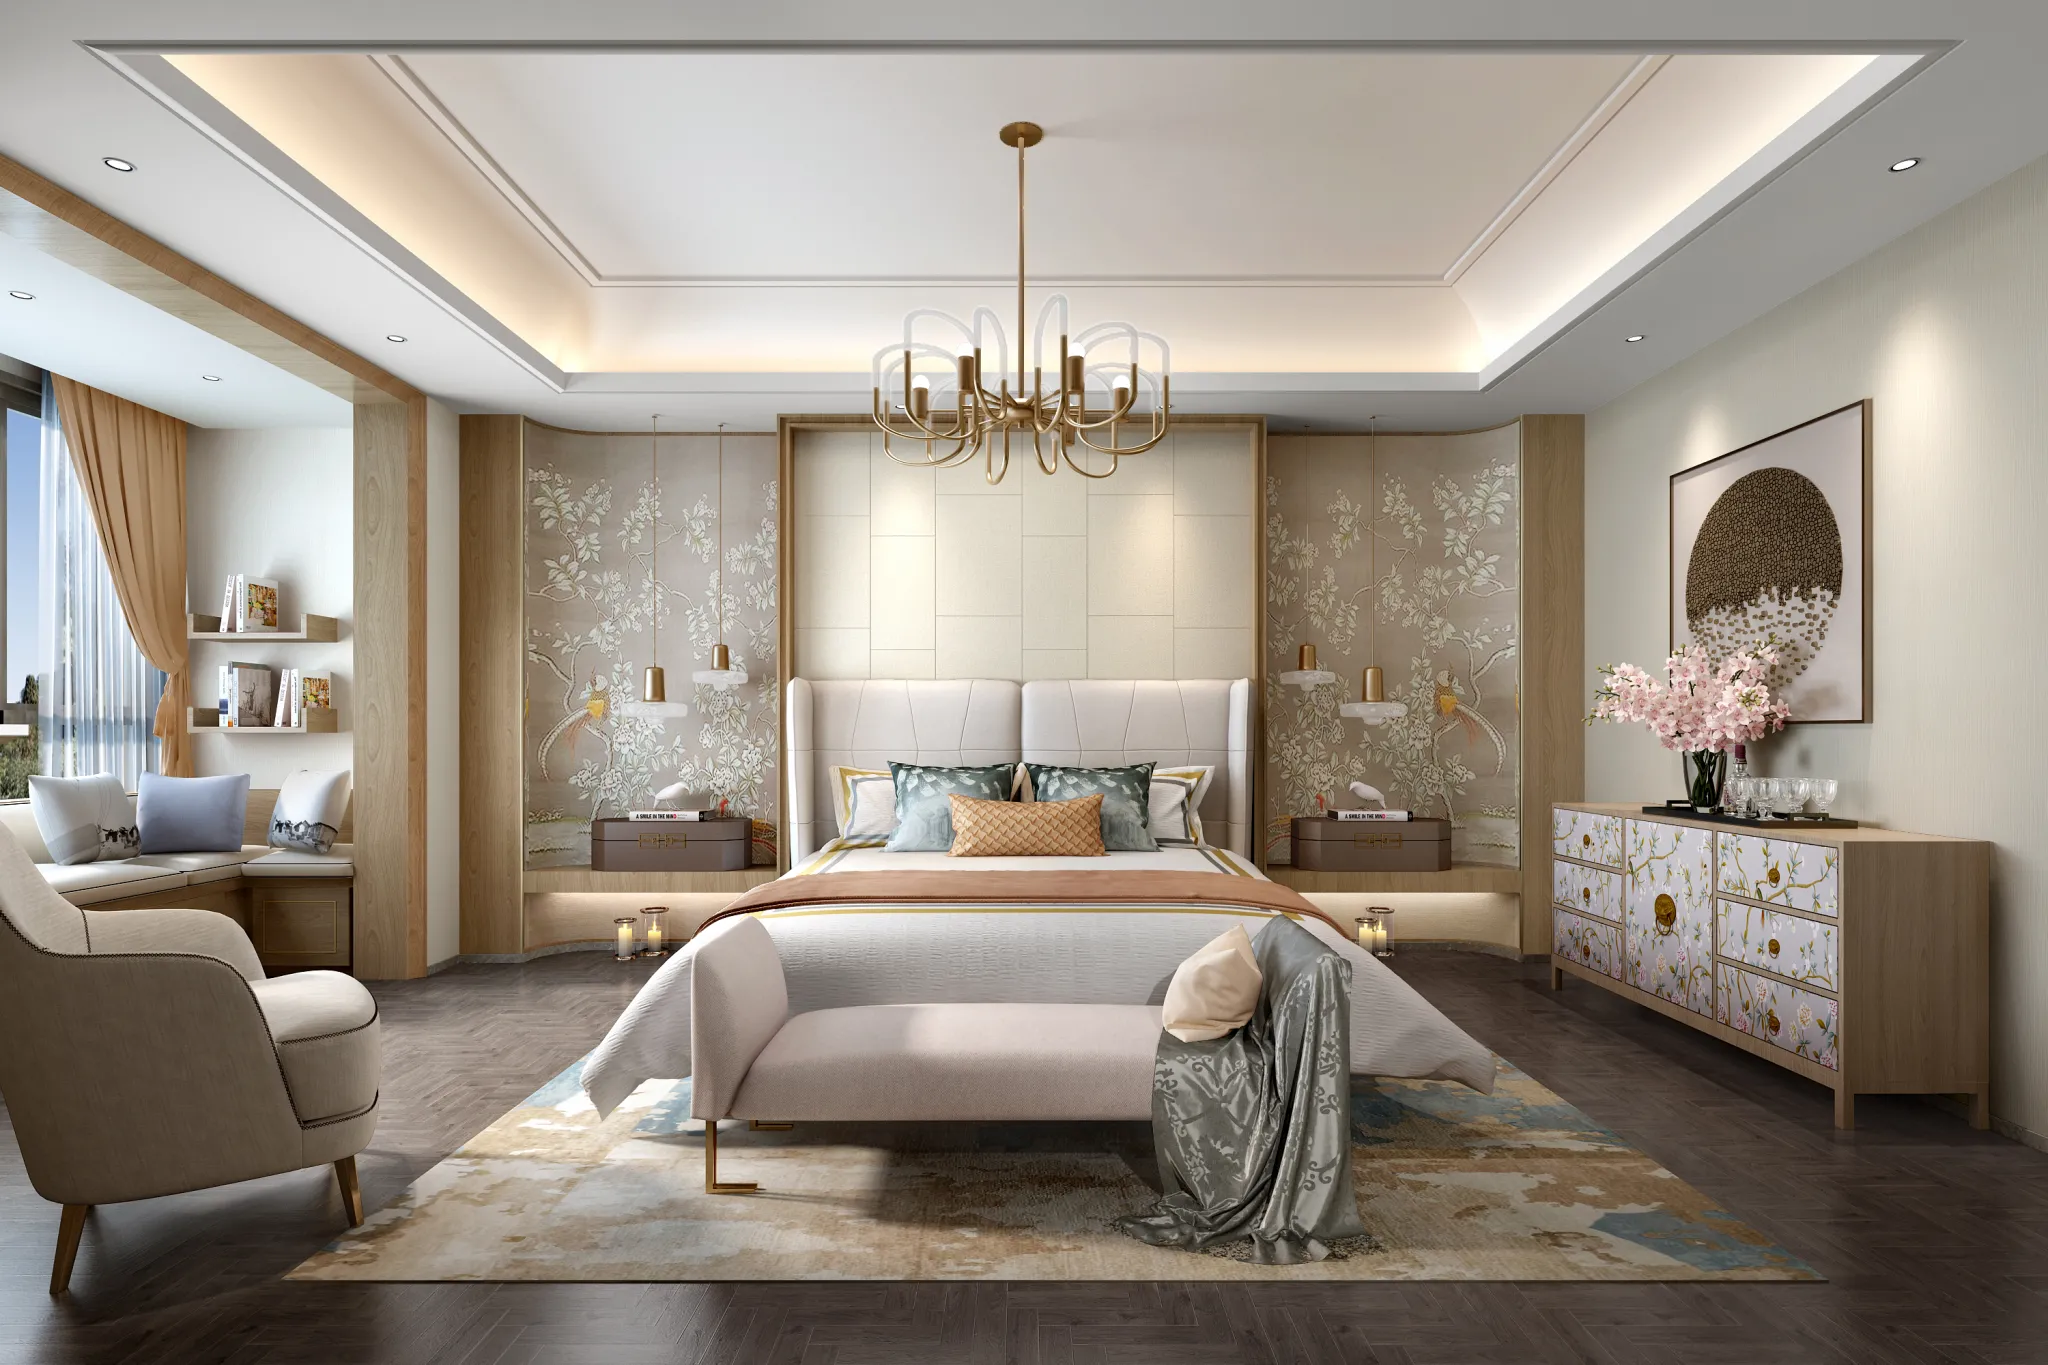 DESMOD INTERIOR 2021 (VRAY)/5. BEDROOM – 2. CHINESE STYLES – 006